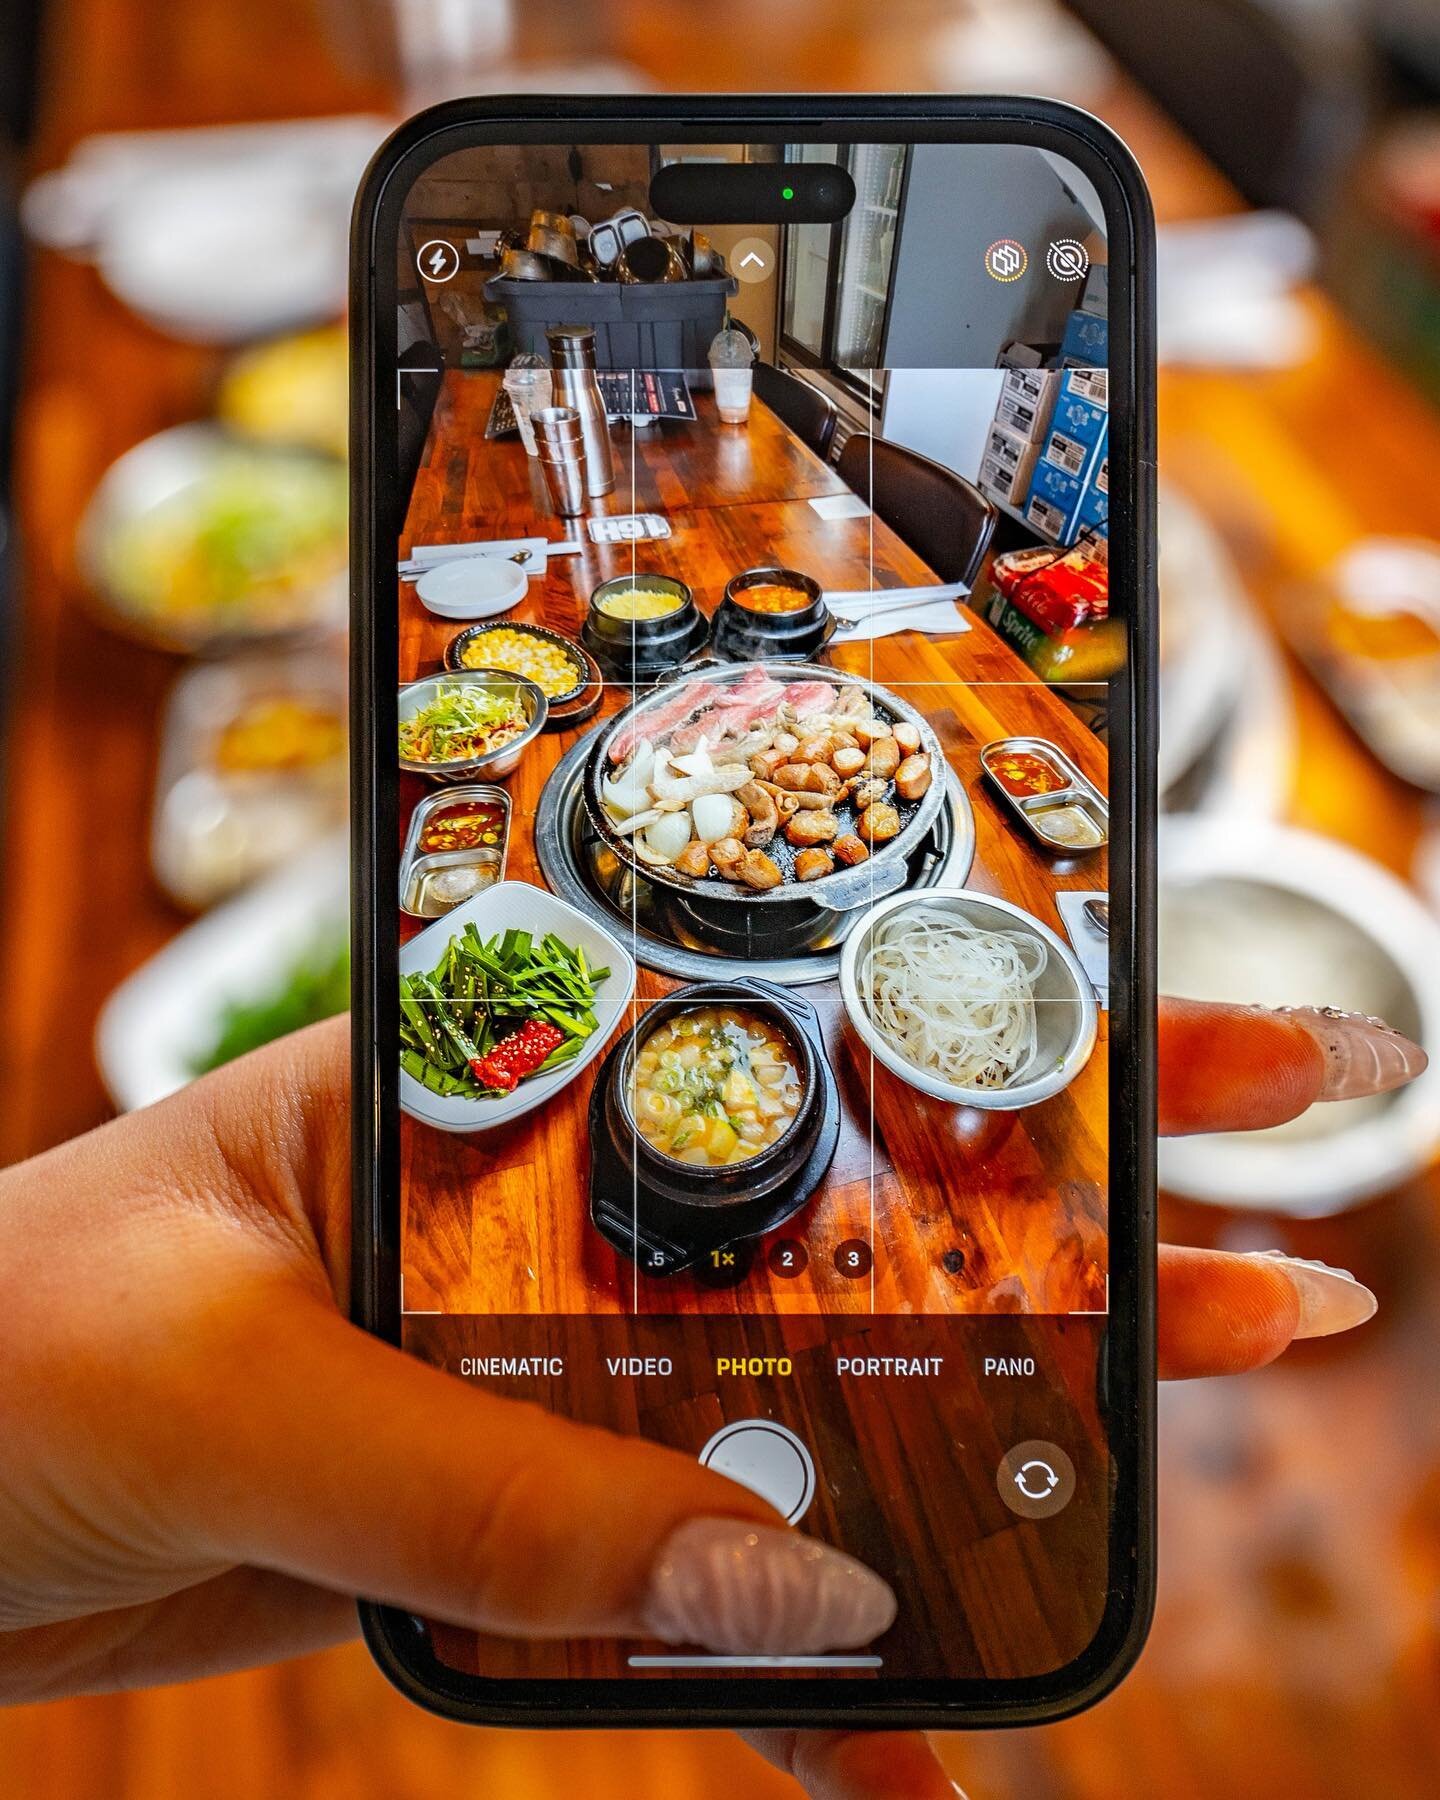 Take a picture and post us on your story mentioning us @songhakbbq 📷
Share our delicious food with your friends &amp; family!

📍356 S Western Ave Ste 201, Los Angeles, CA 90020
.
.
#foodie #foodiereels #ayce #losangelesfoodie #koreanfood #meatlover